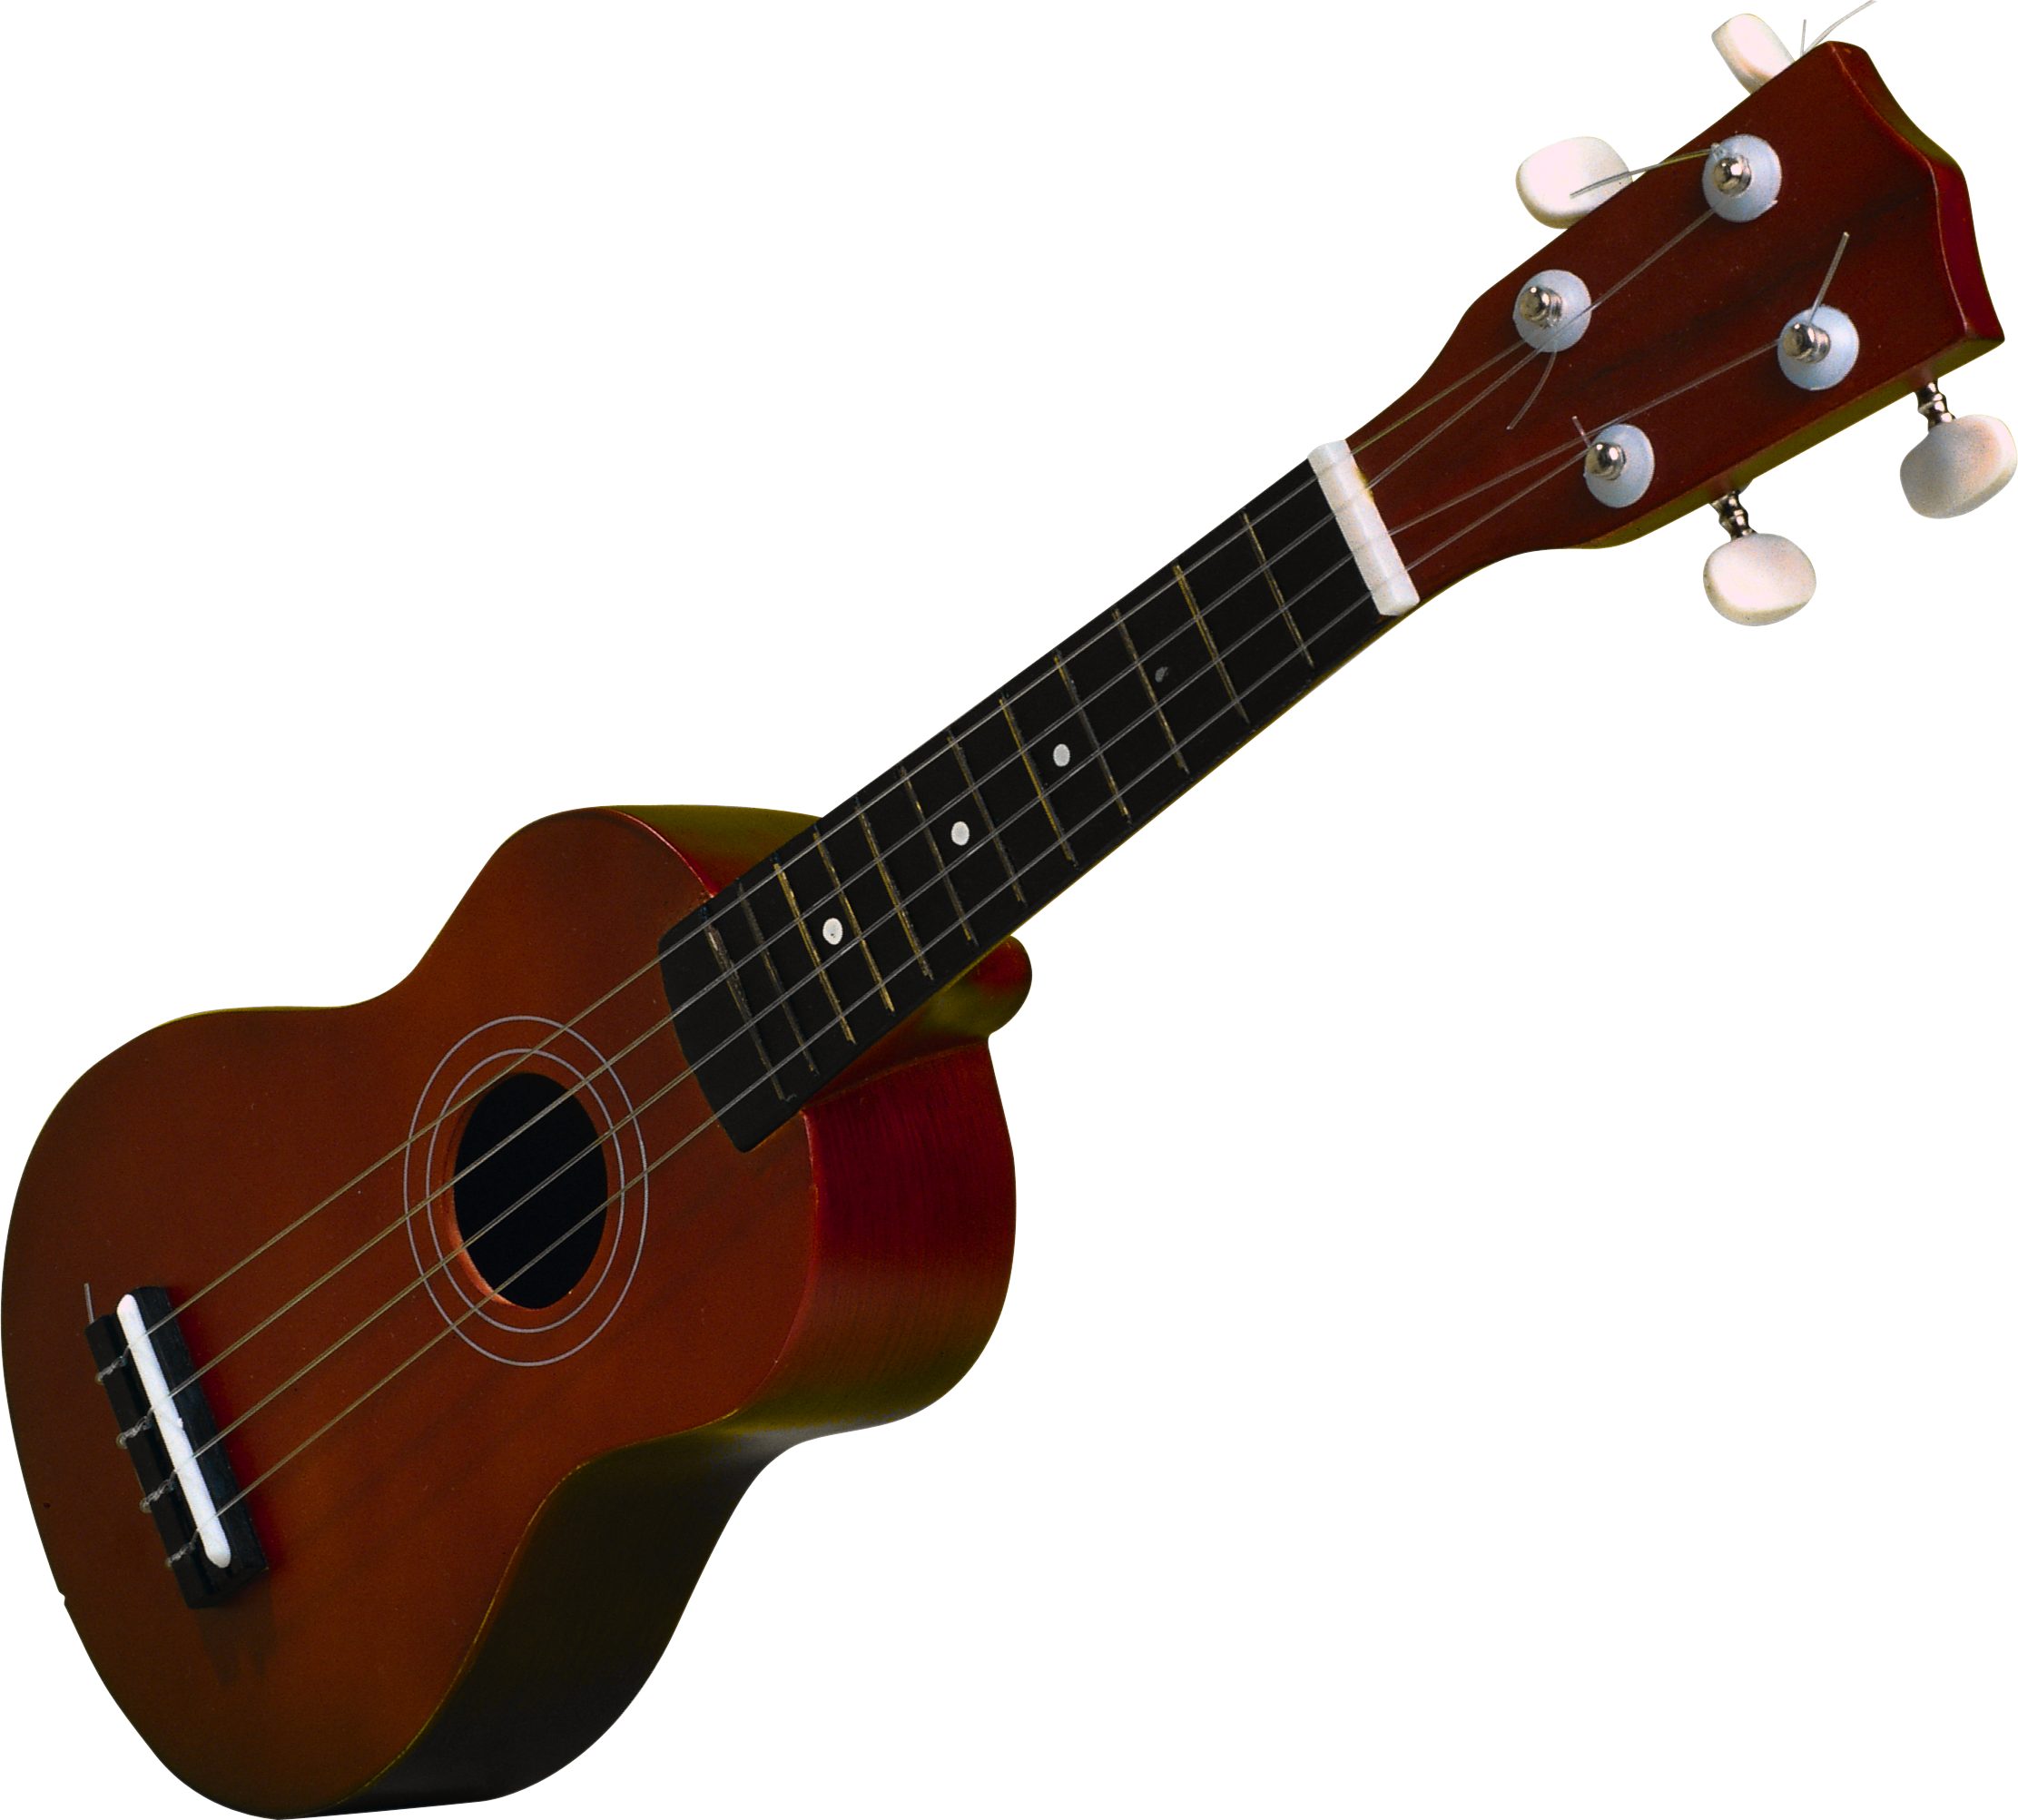 Electro-Acoustic Guitar Download Free PNG